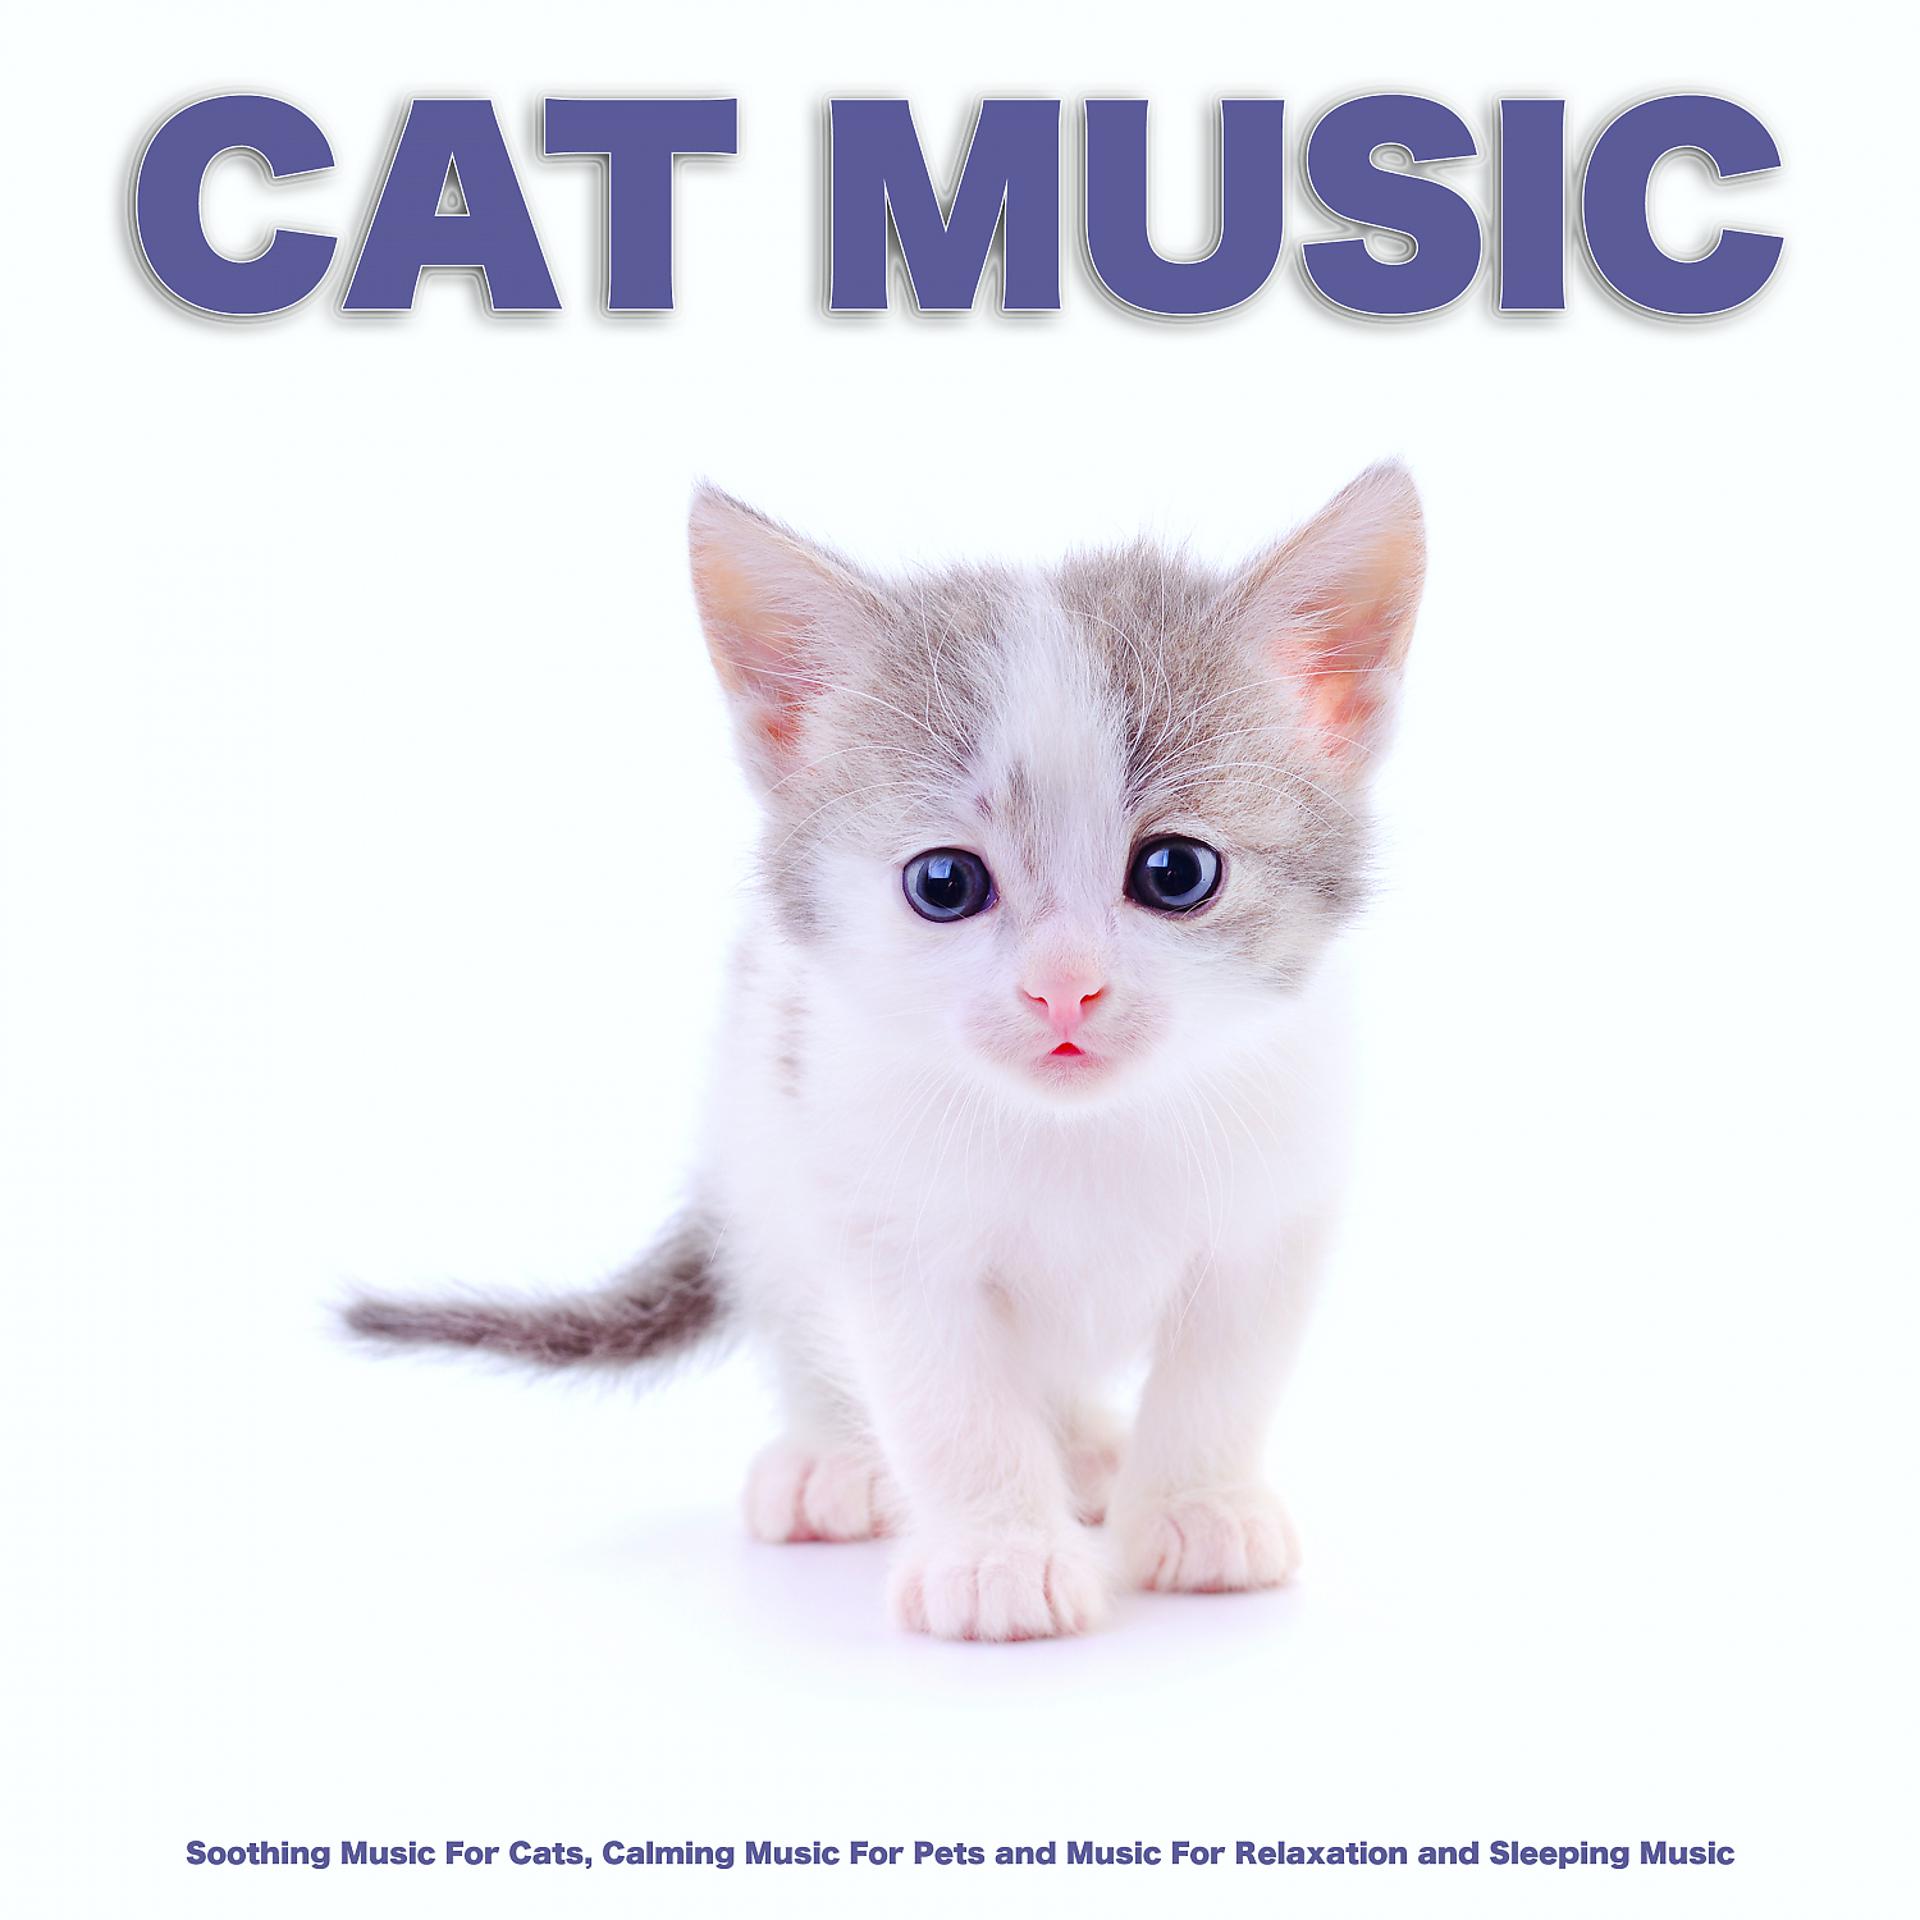 Music for cats. Calming Music for Cats. Relax Cat Music. Cat. Слушать. Relaxing Music for Cats.